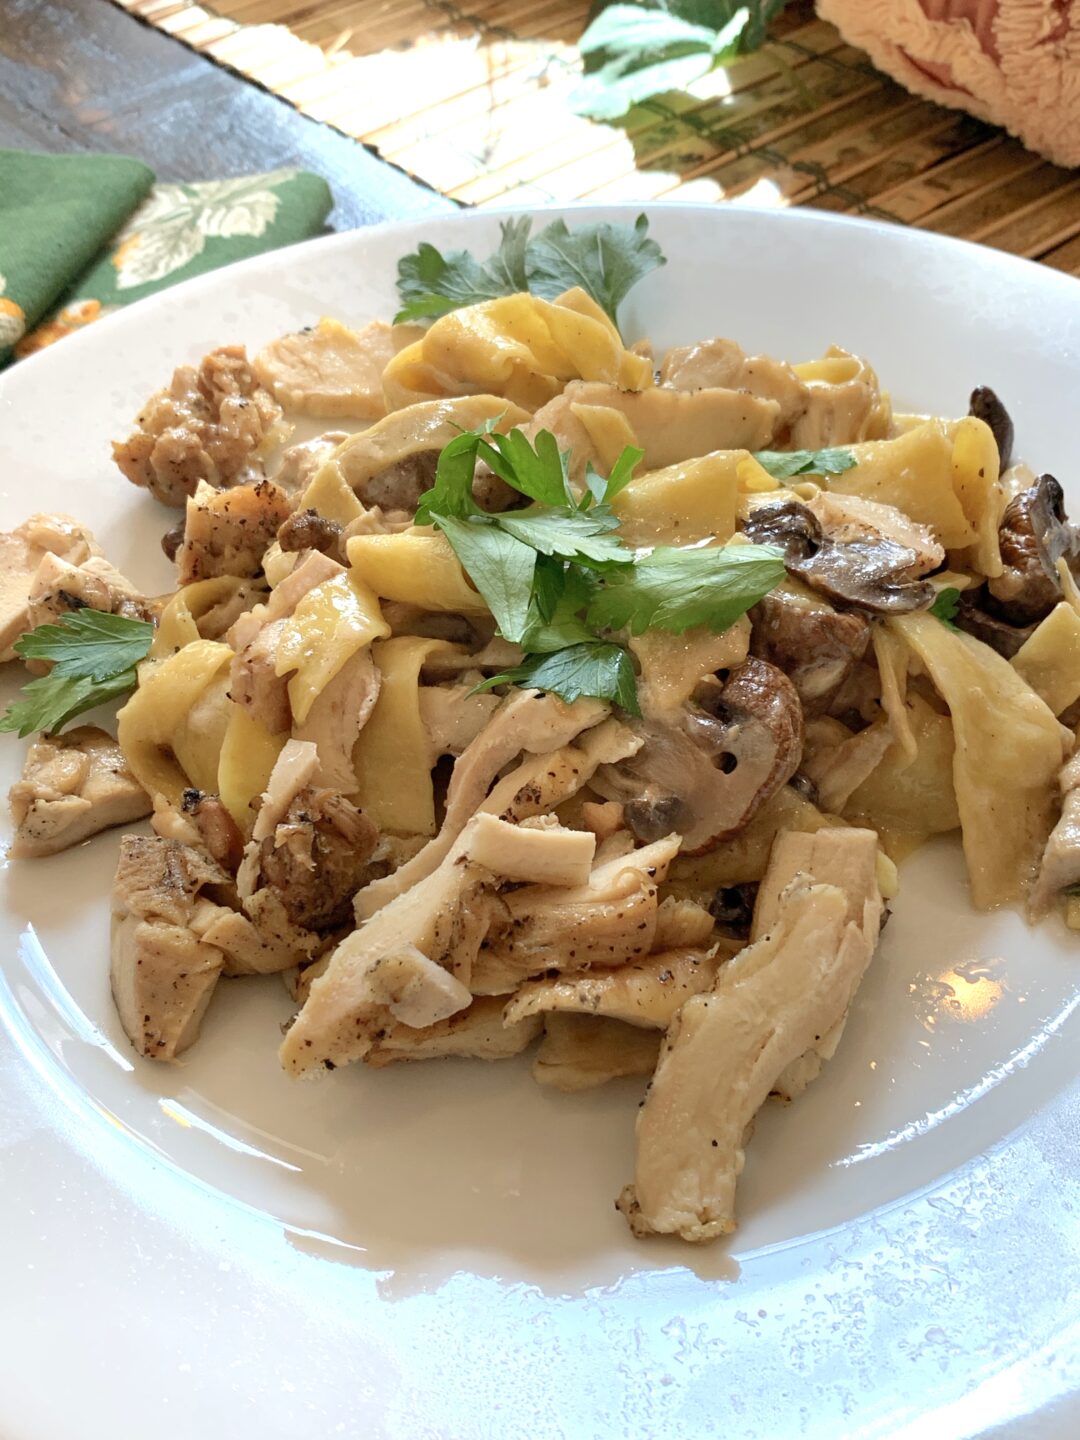 Smoked Mushrooms And Chicken With Pappardelle Pasta Rosemary And The Goat